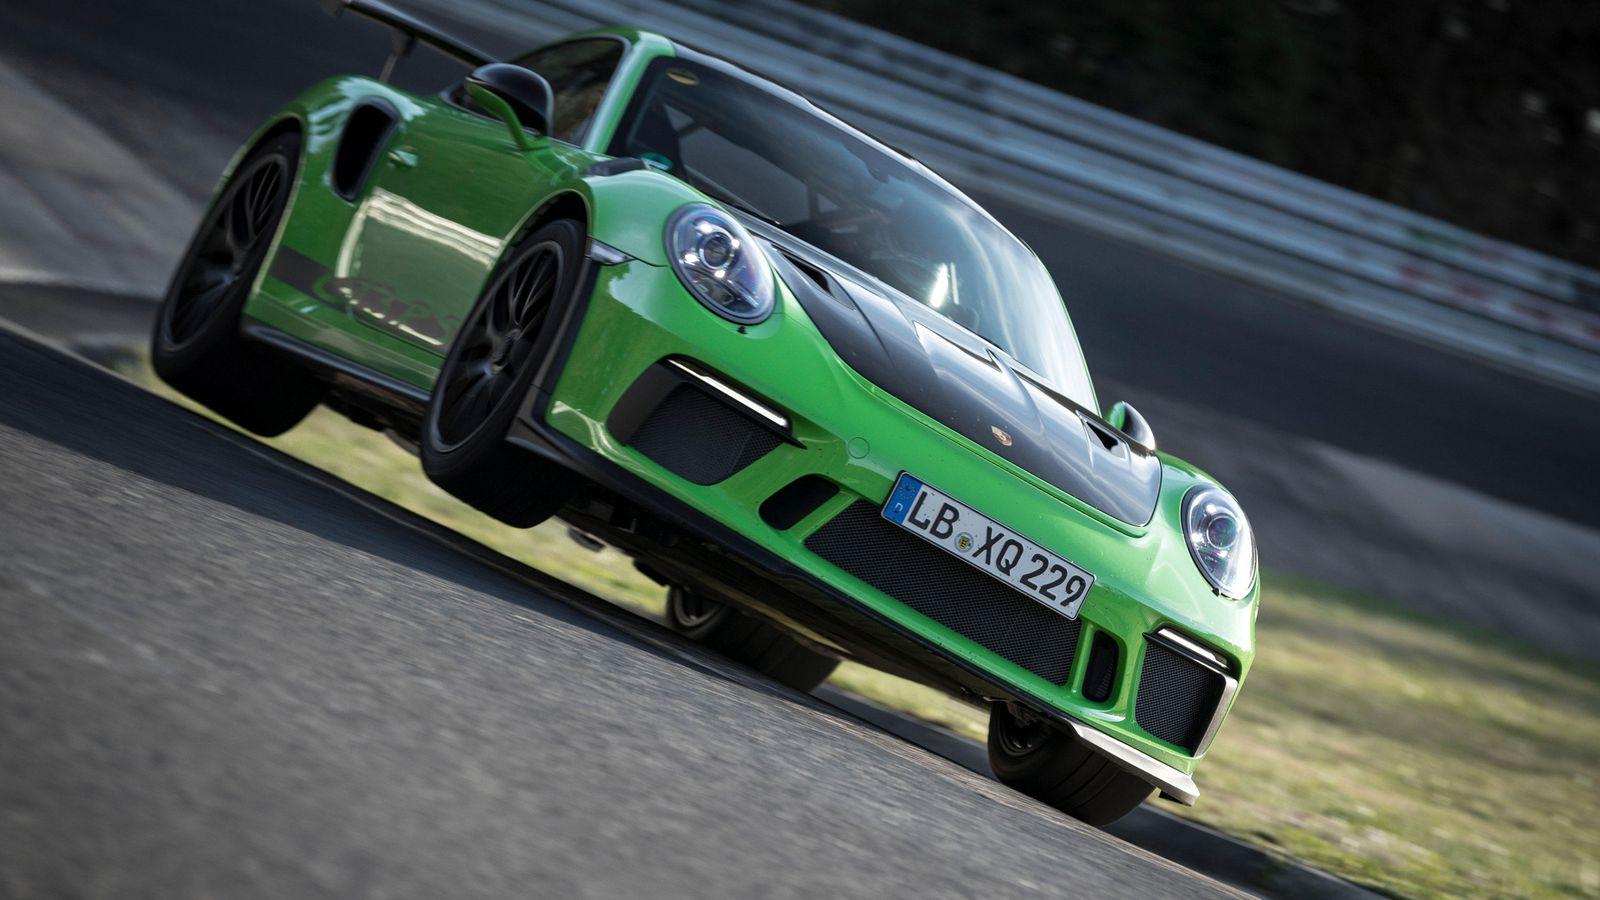 Porsche 911 GT3 RS Dominates Nurburgring With Sub 7 Minute